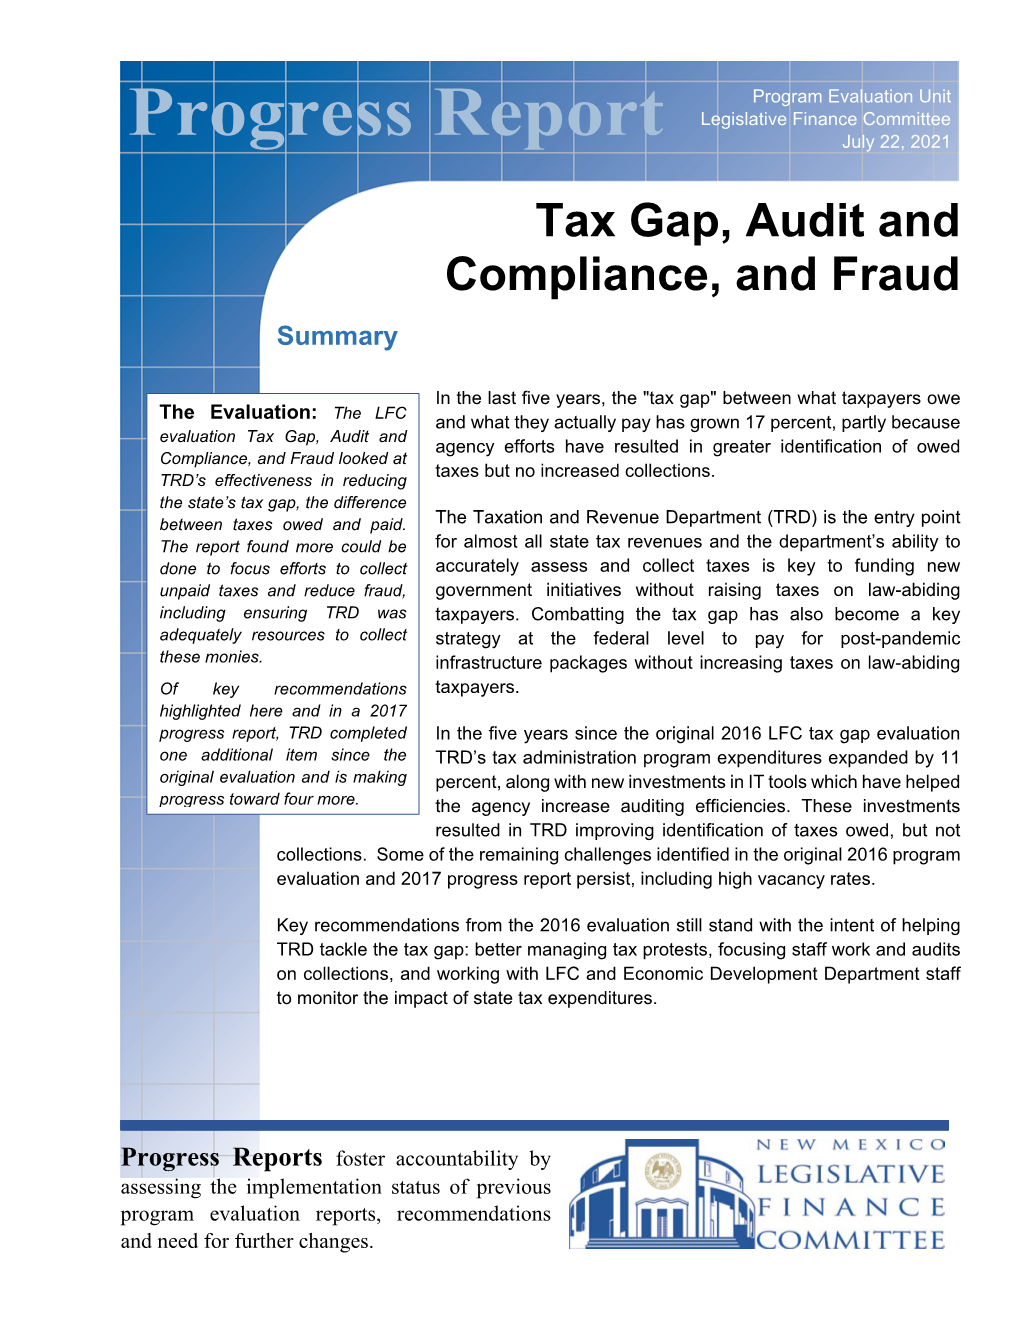 Tax Gap, Audit and Compliance, and Fraud Summary